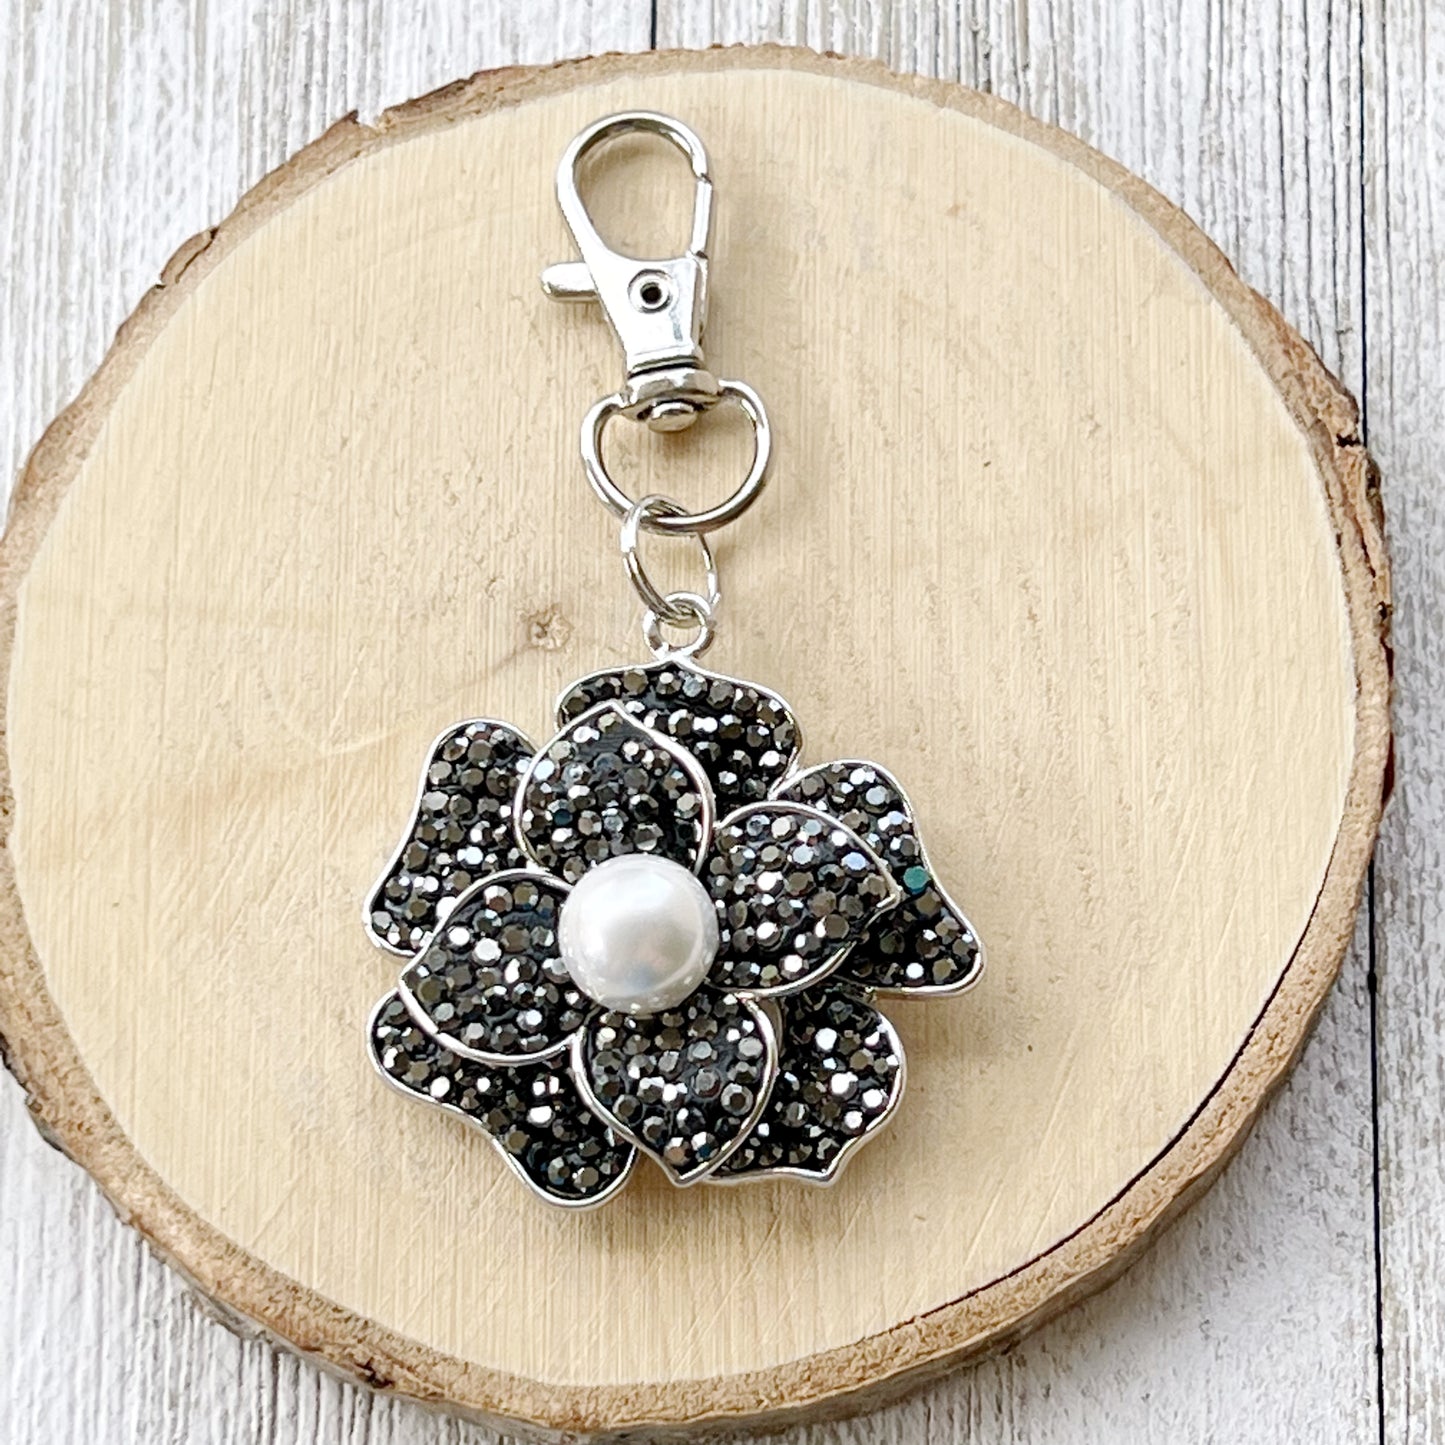 Flower Purse Charm with Rhinestones & Pearl: Elegant Accessory for Your Bag